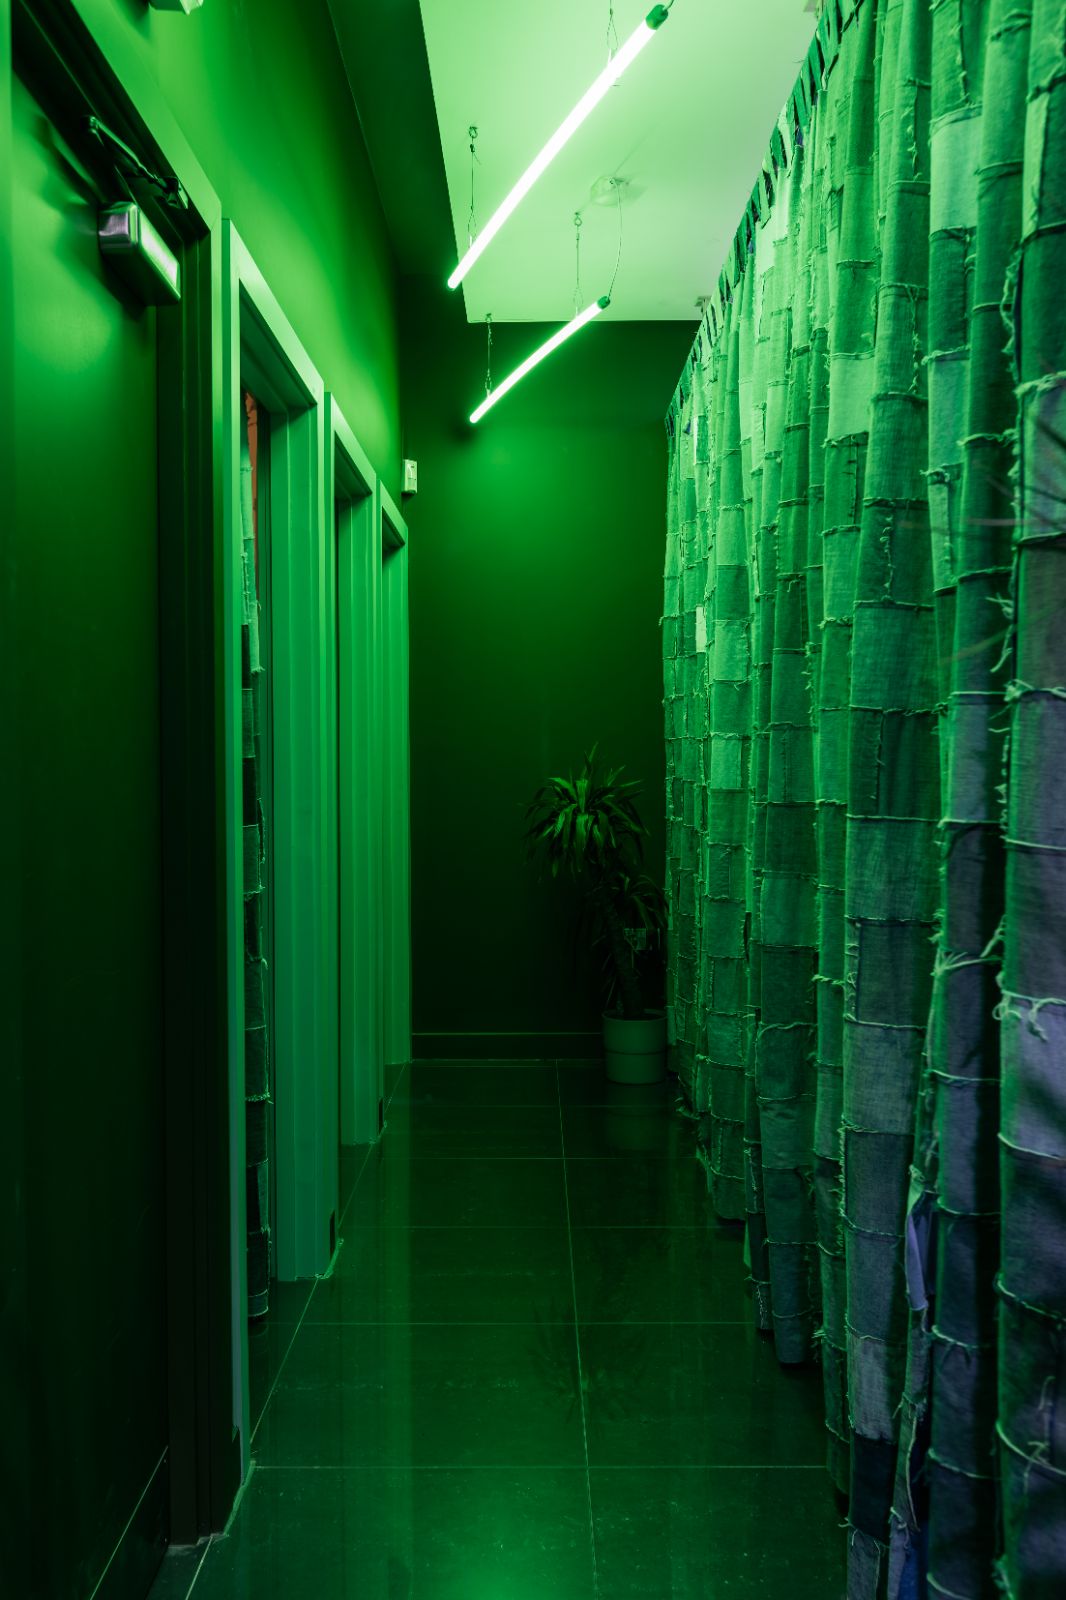 Shop dressing rooms with upcycled patched-denim curtains and two L.E.D tube lights tinting the space green